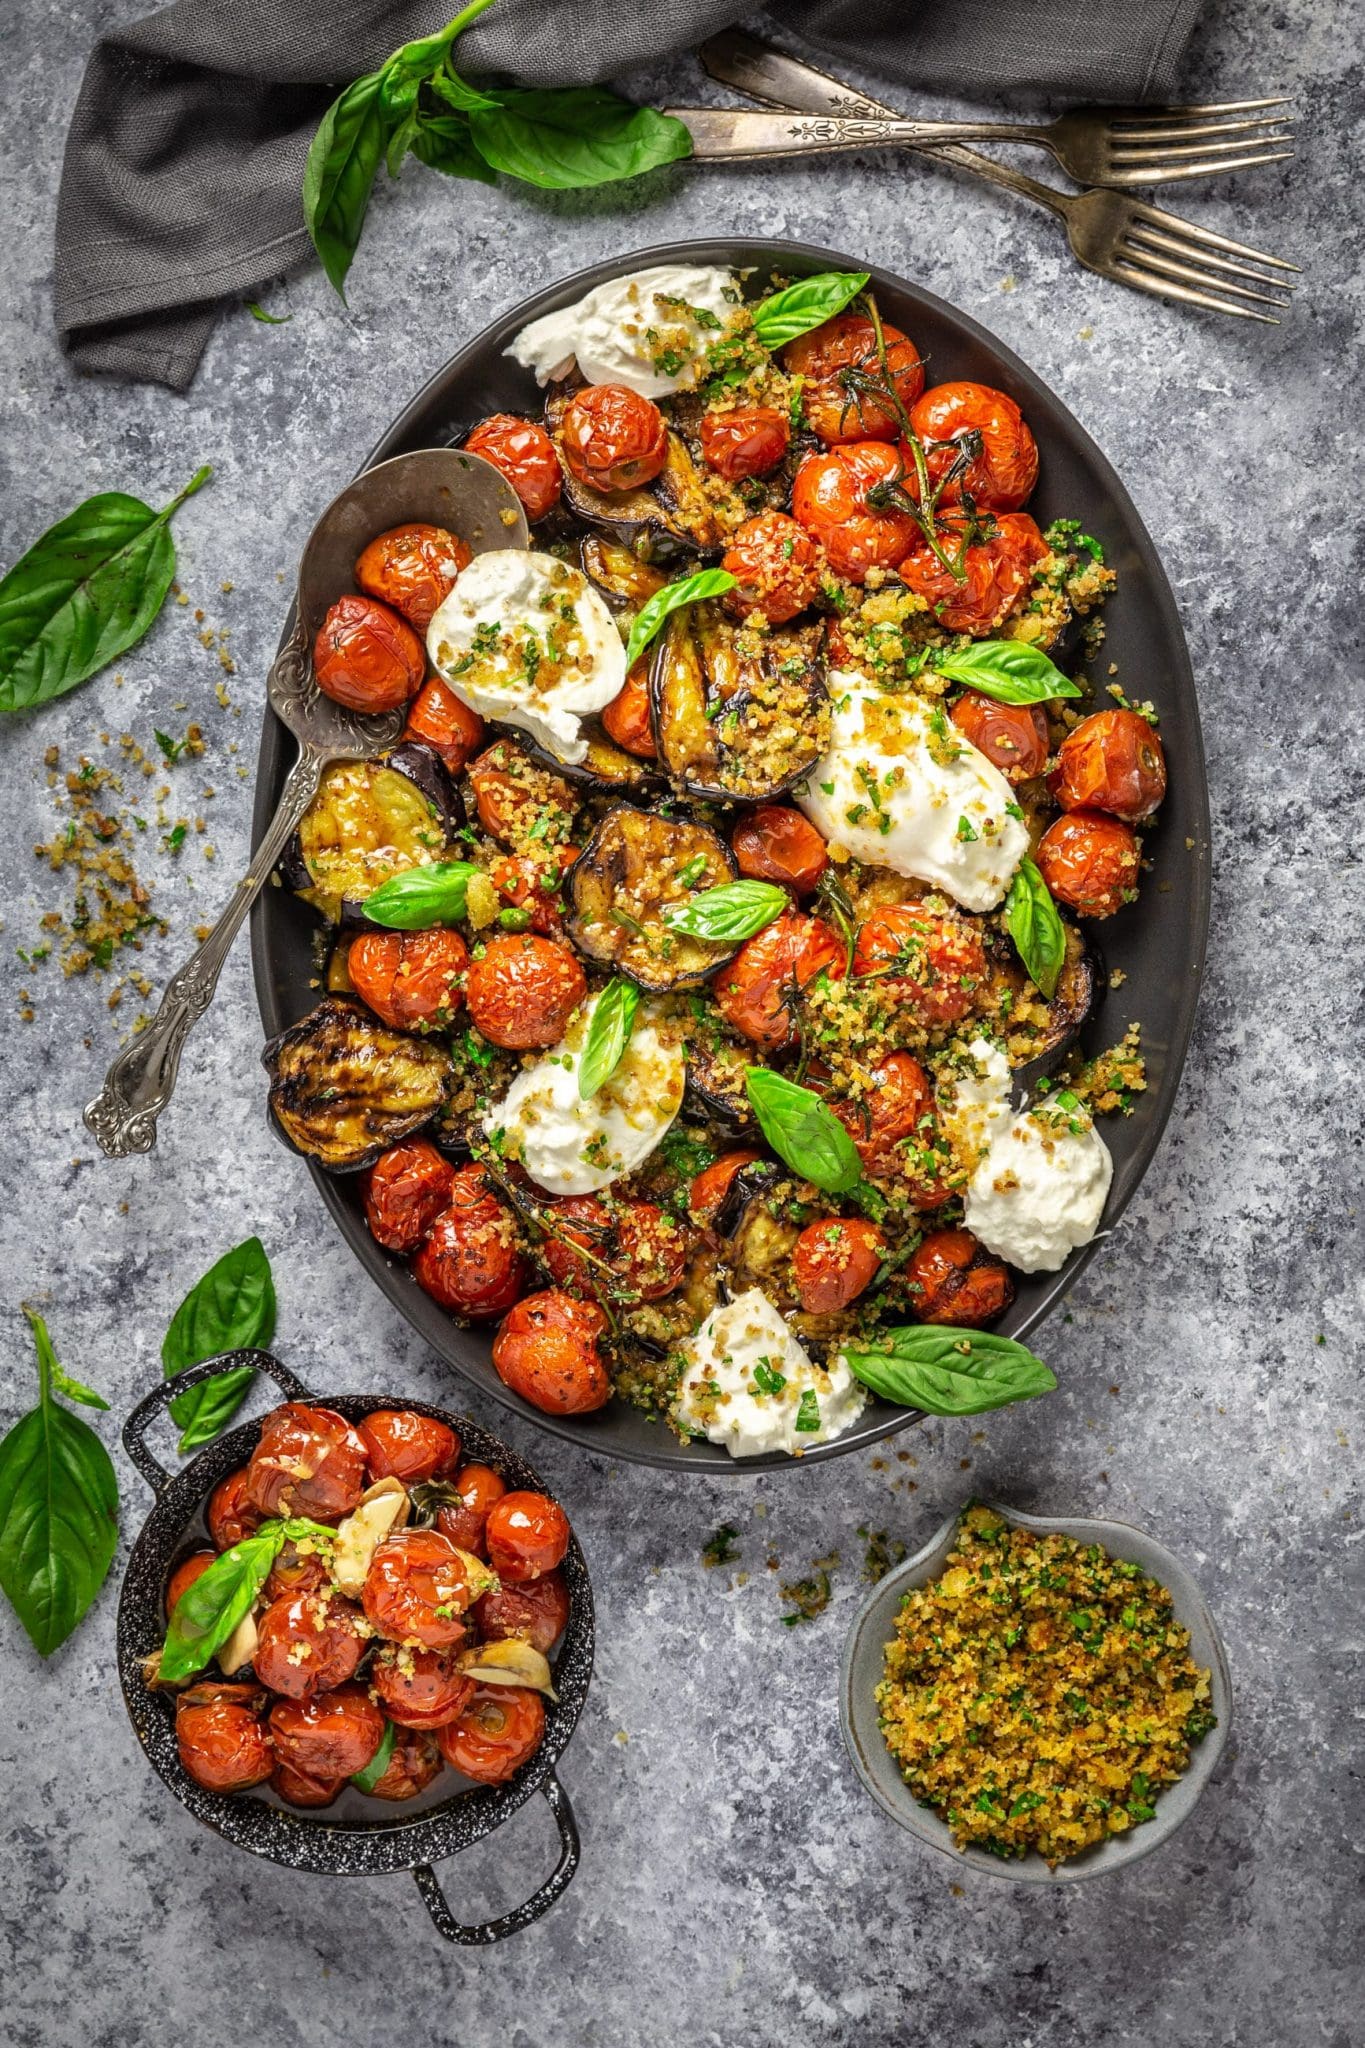 A Light, Grilled Eggplant Parmesan with Roasted Tomatoes and Burrata